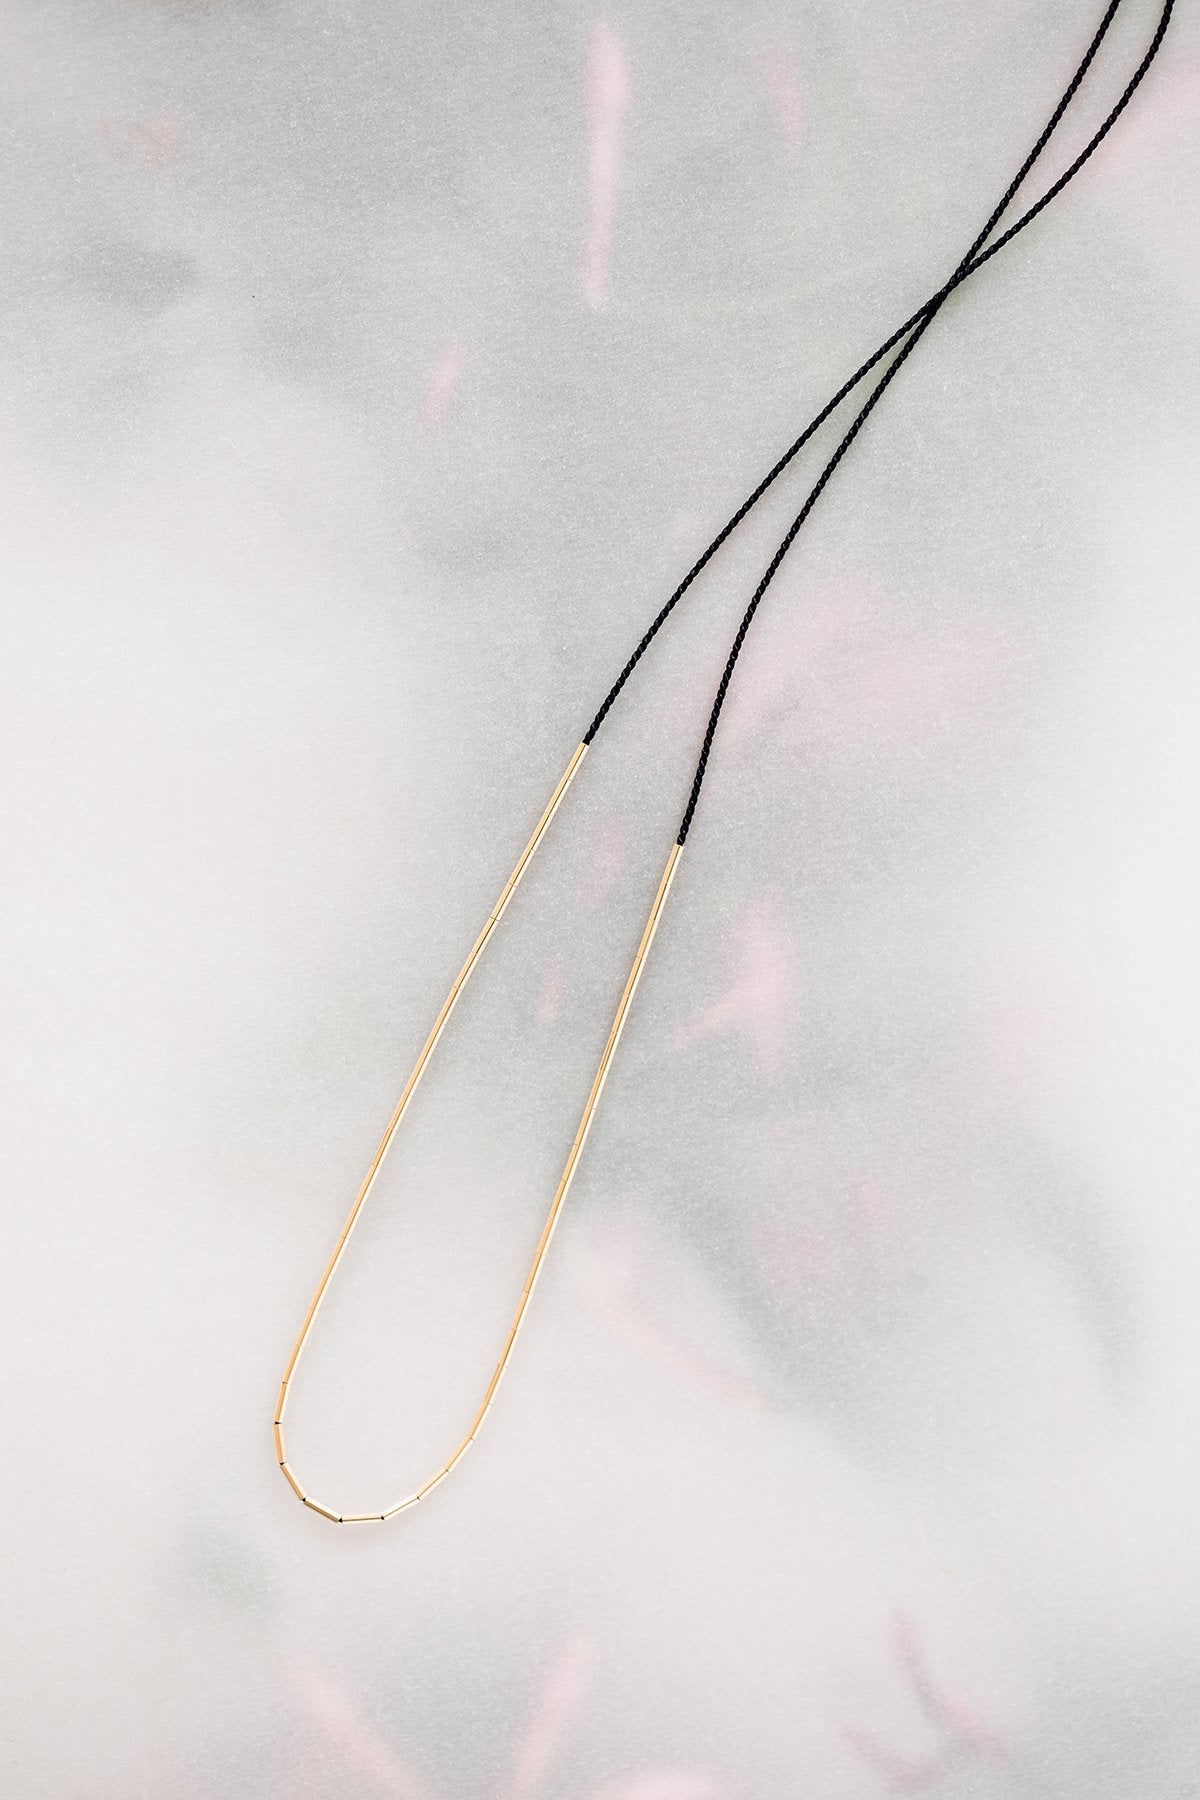 The Dorado Necklace by Abacus Row - long black silk cord necklace with 14k gold fill tubes that can be moved around on the cord to create multiple minimalist looks